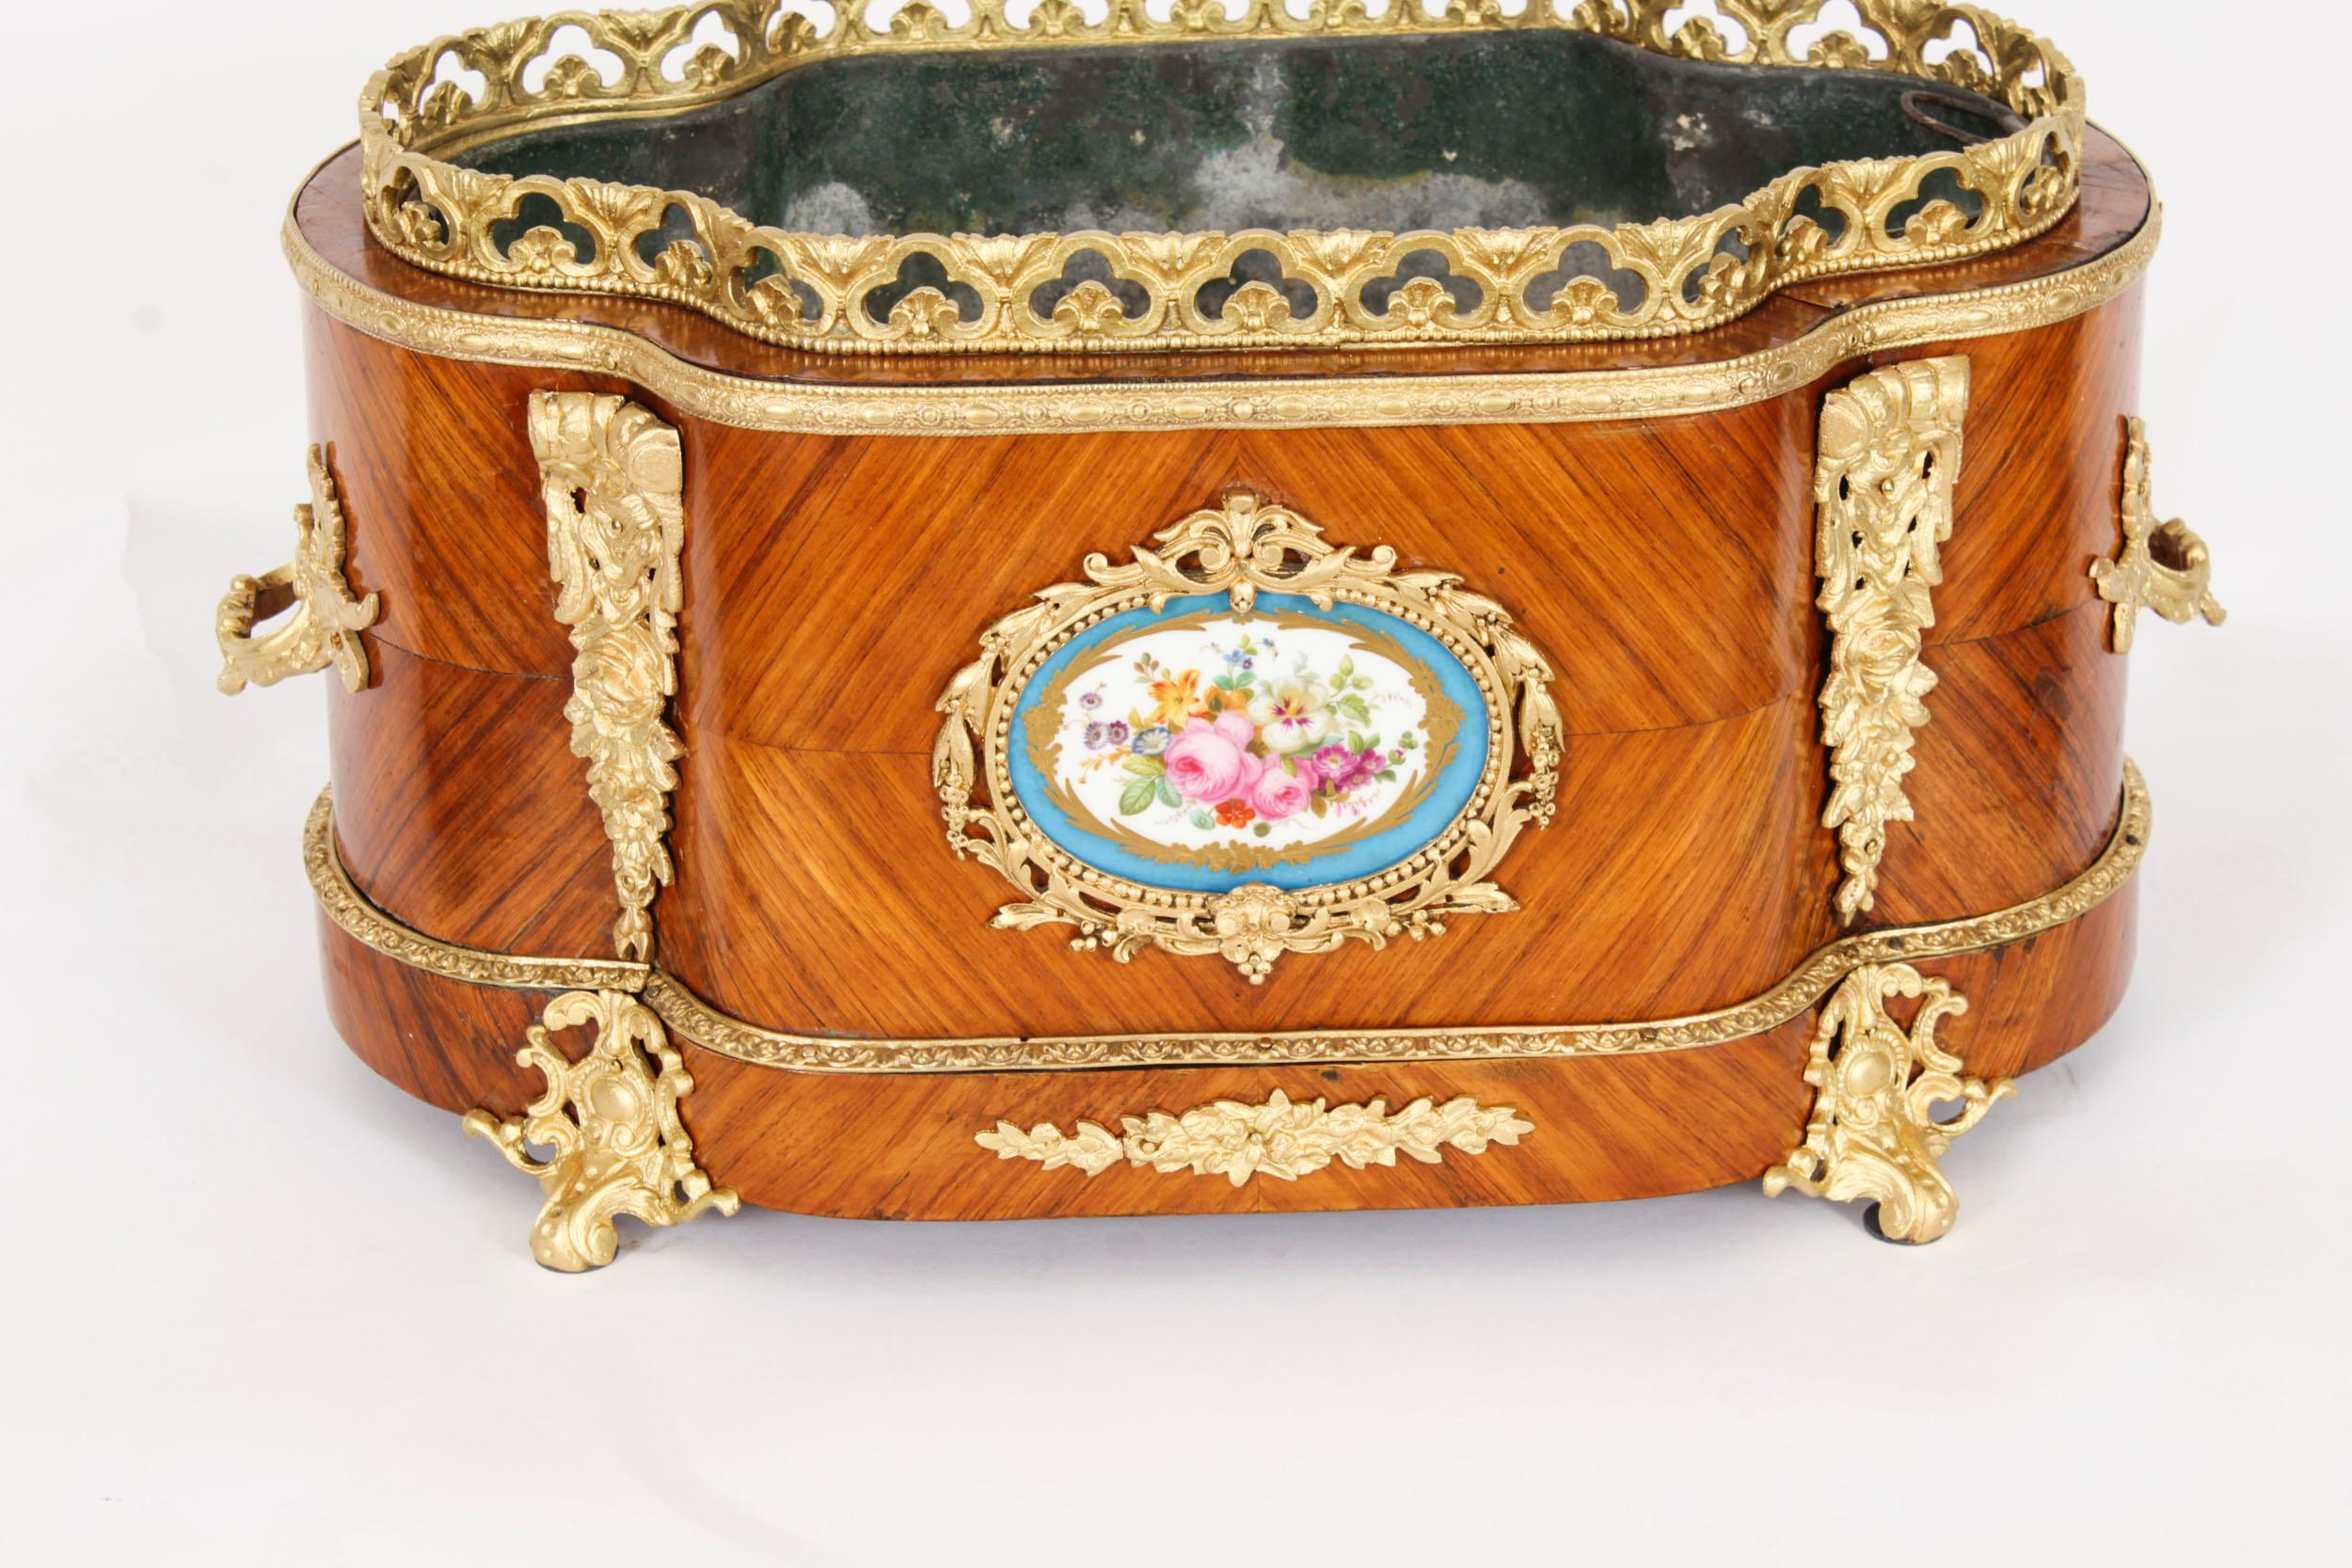 Antique French Sevres Porcelain Ormolu Mounted Planter Jardiniere 19th Century For Sale 6